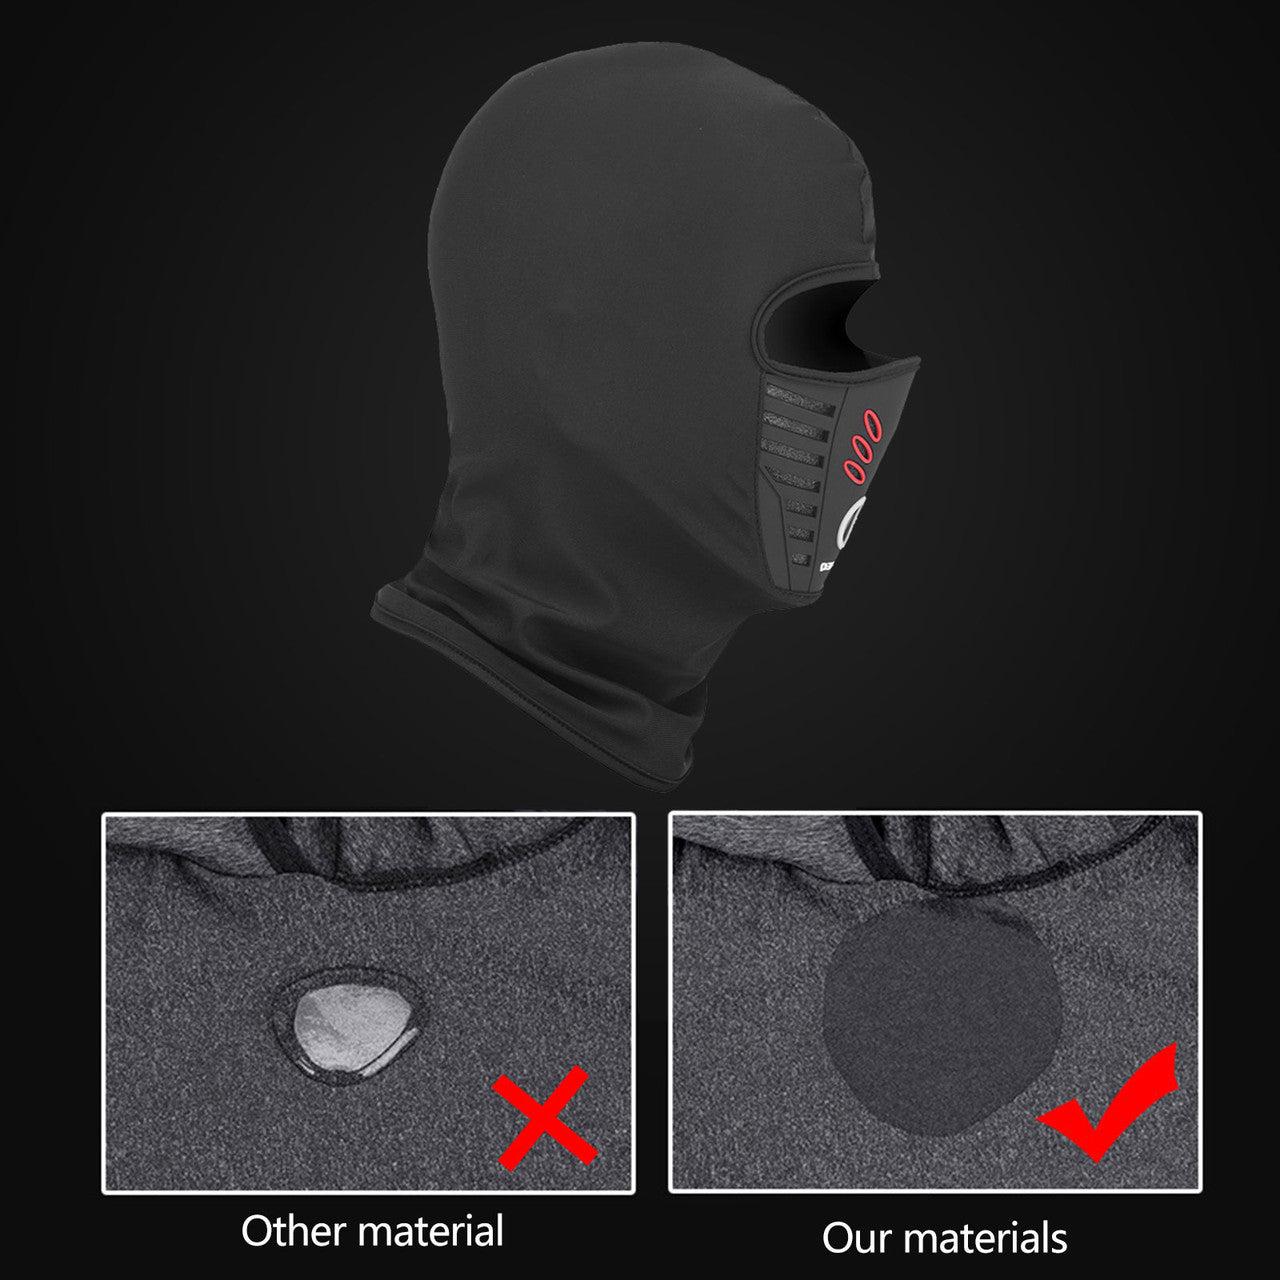 Water Resistant and Windproof Thermal Retention Face Mask, Cold Weather Face Mask, Cycling Motorcycle Neck Warmer Hood Winter Gear for Men Women, Black